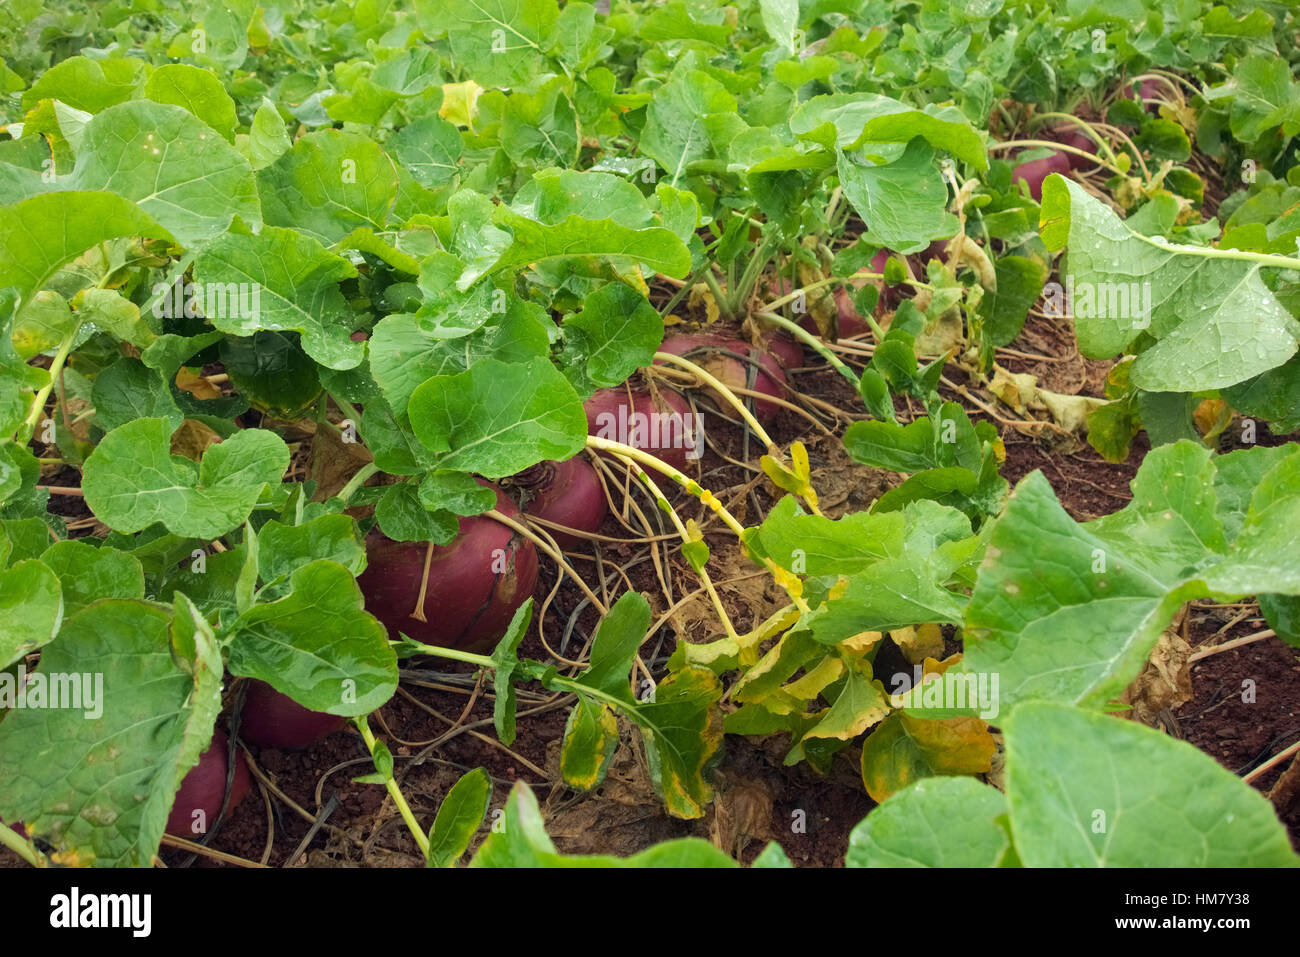 A crop of Swede in November Brassica napus (Napobrassica Group) Stock Photo